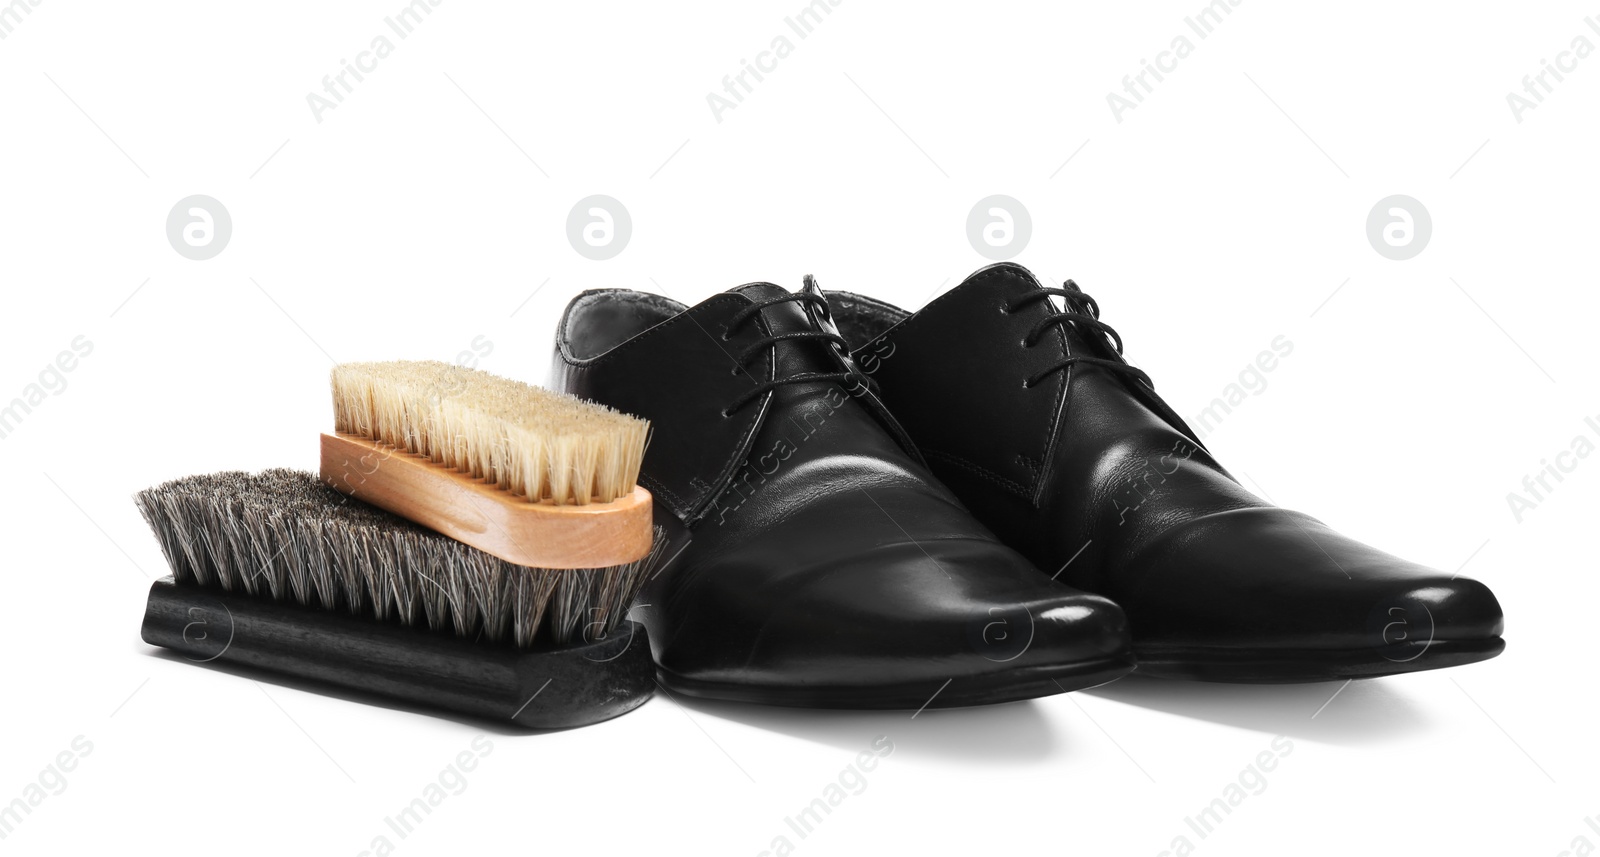 Photo of Stylish men's shoes and cleaning brushes on white background